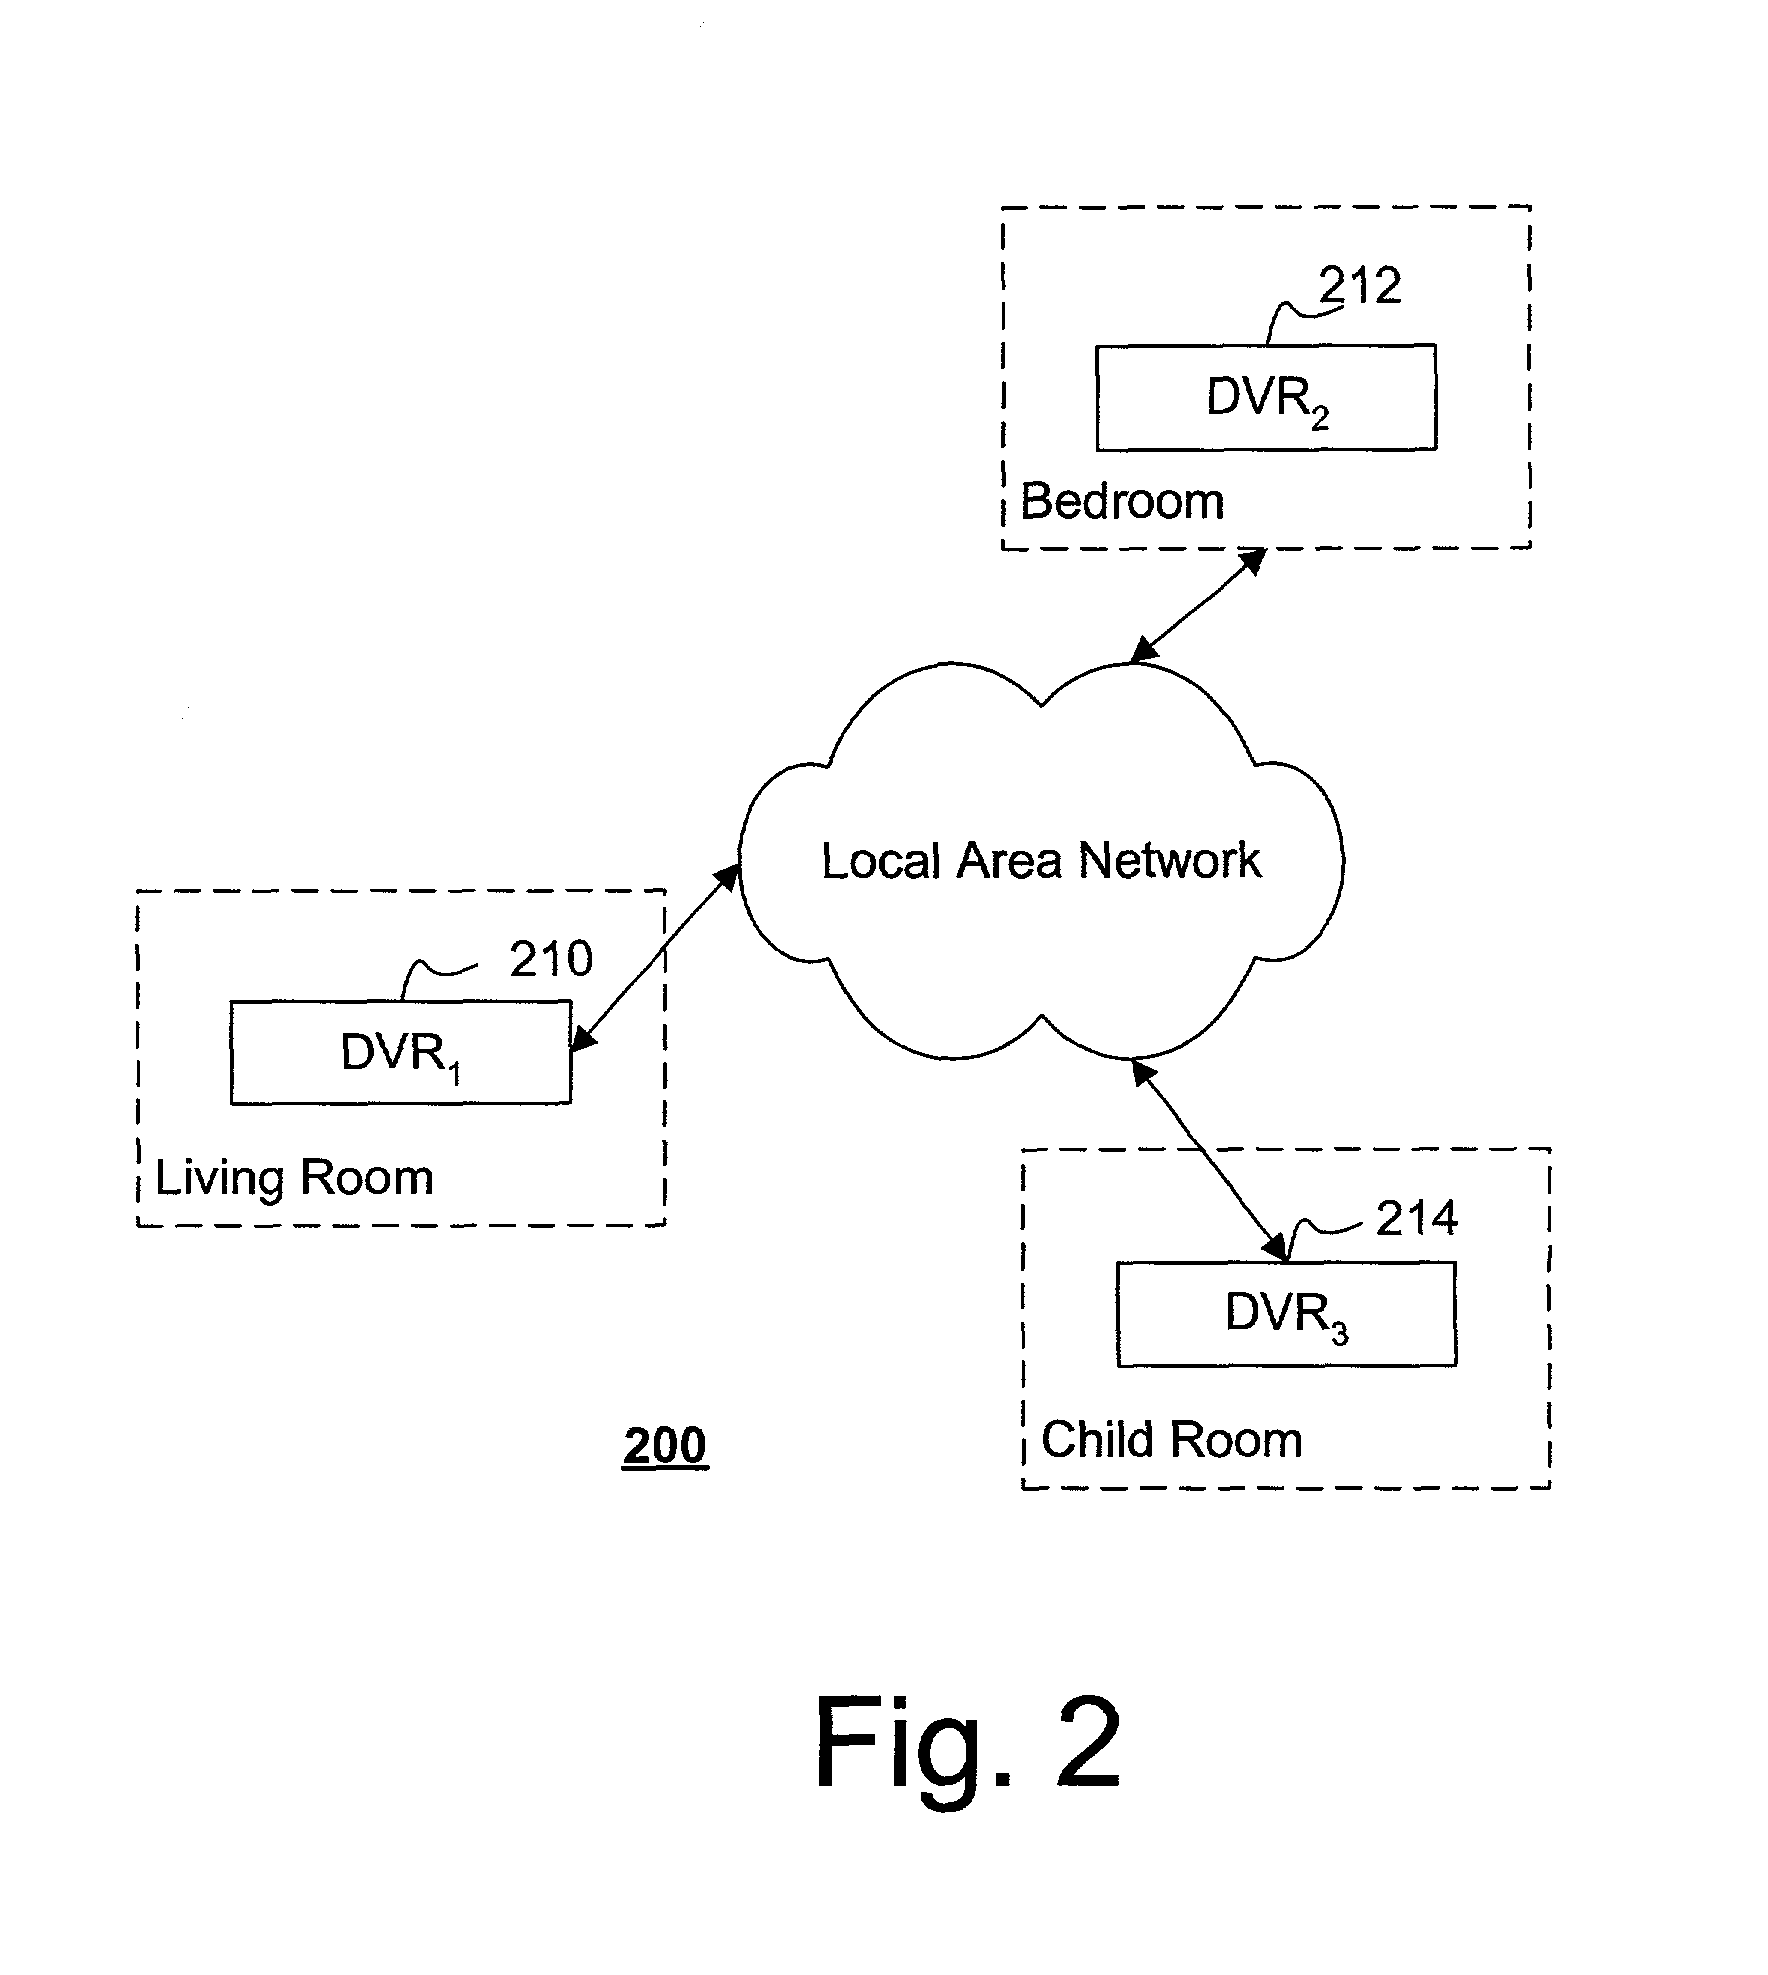 Interface for resolving recording conflicts with network devices